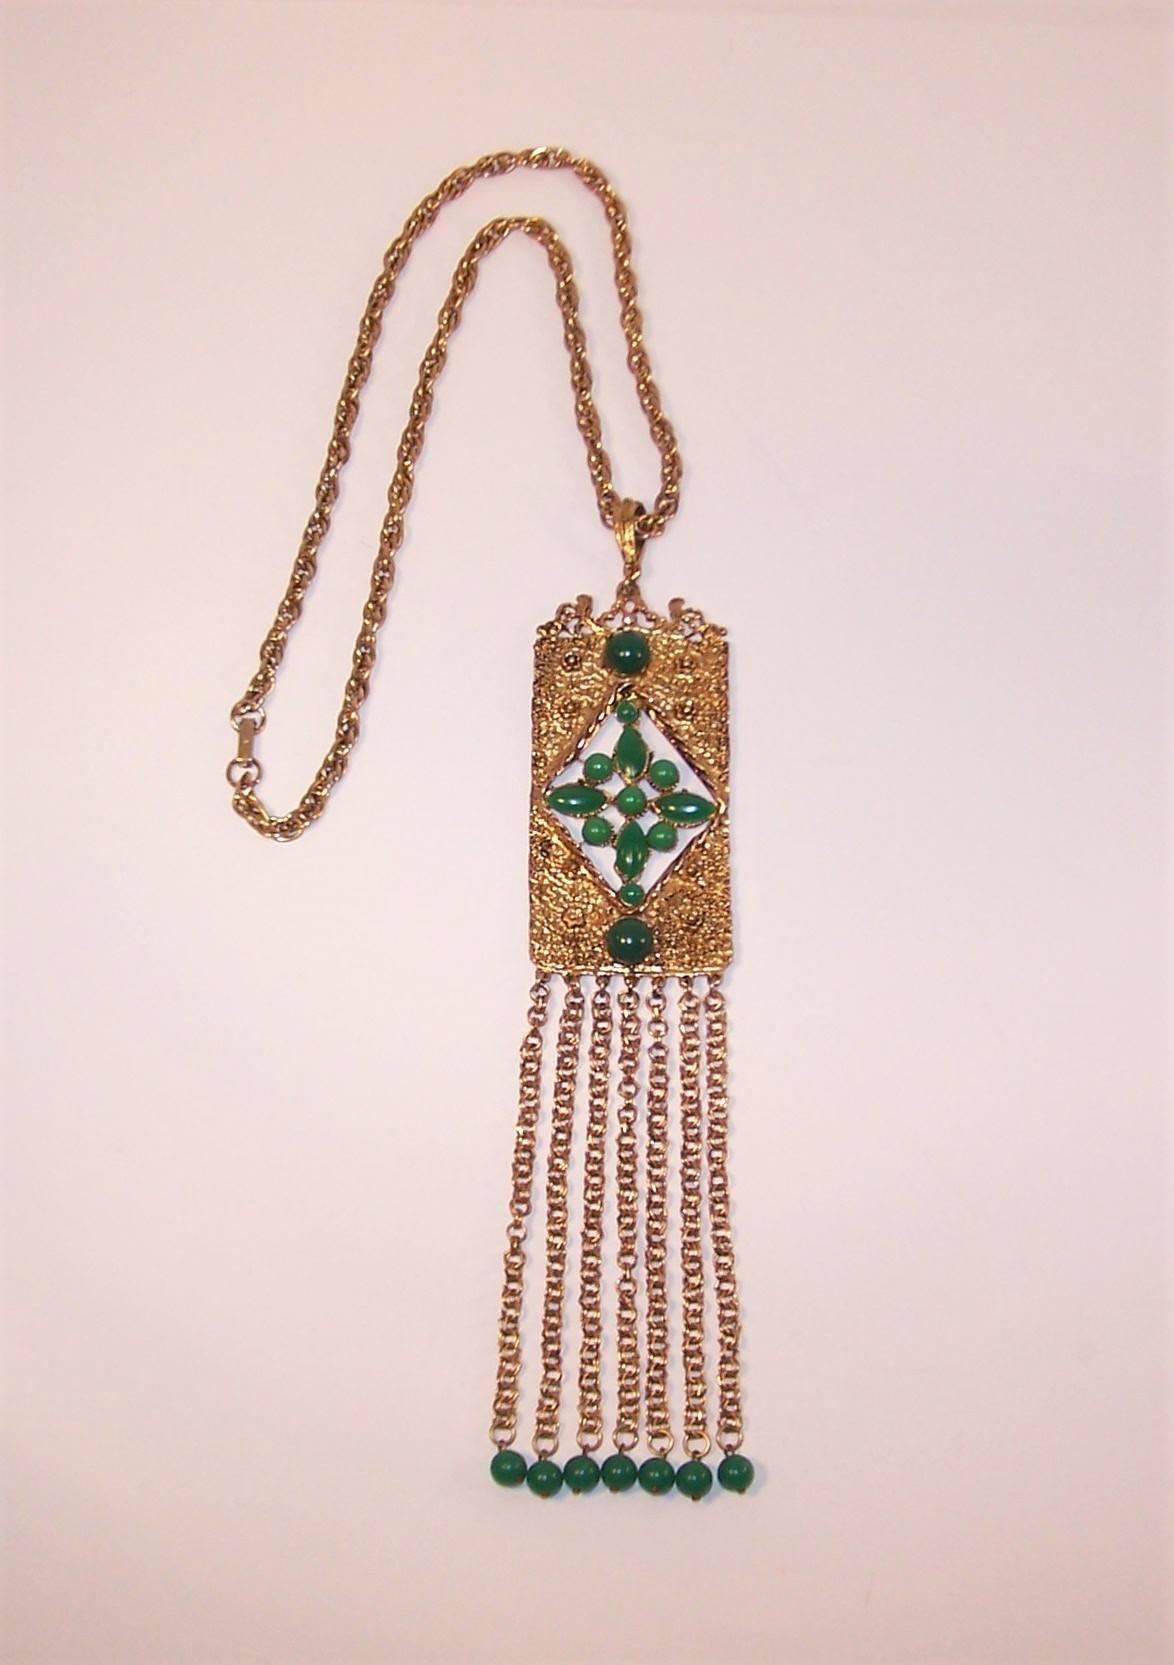 Etruscan Revival C.1970 Brutalist Medallion Necklace With Faux Jade Green Stones